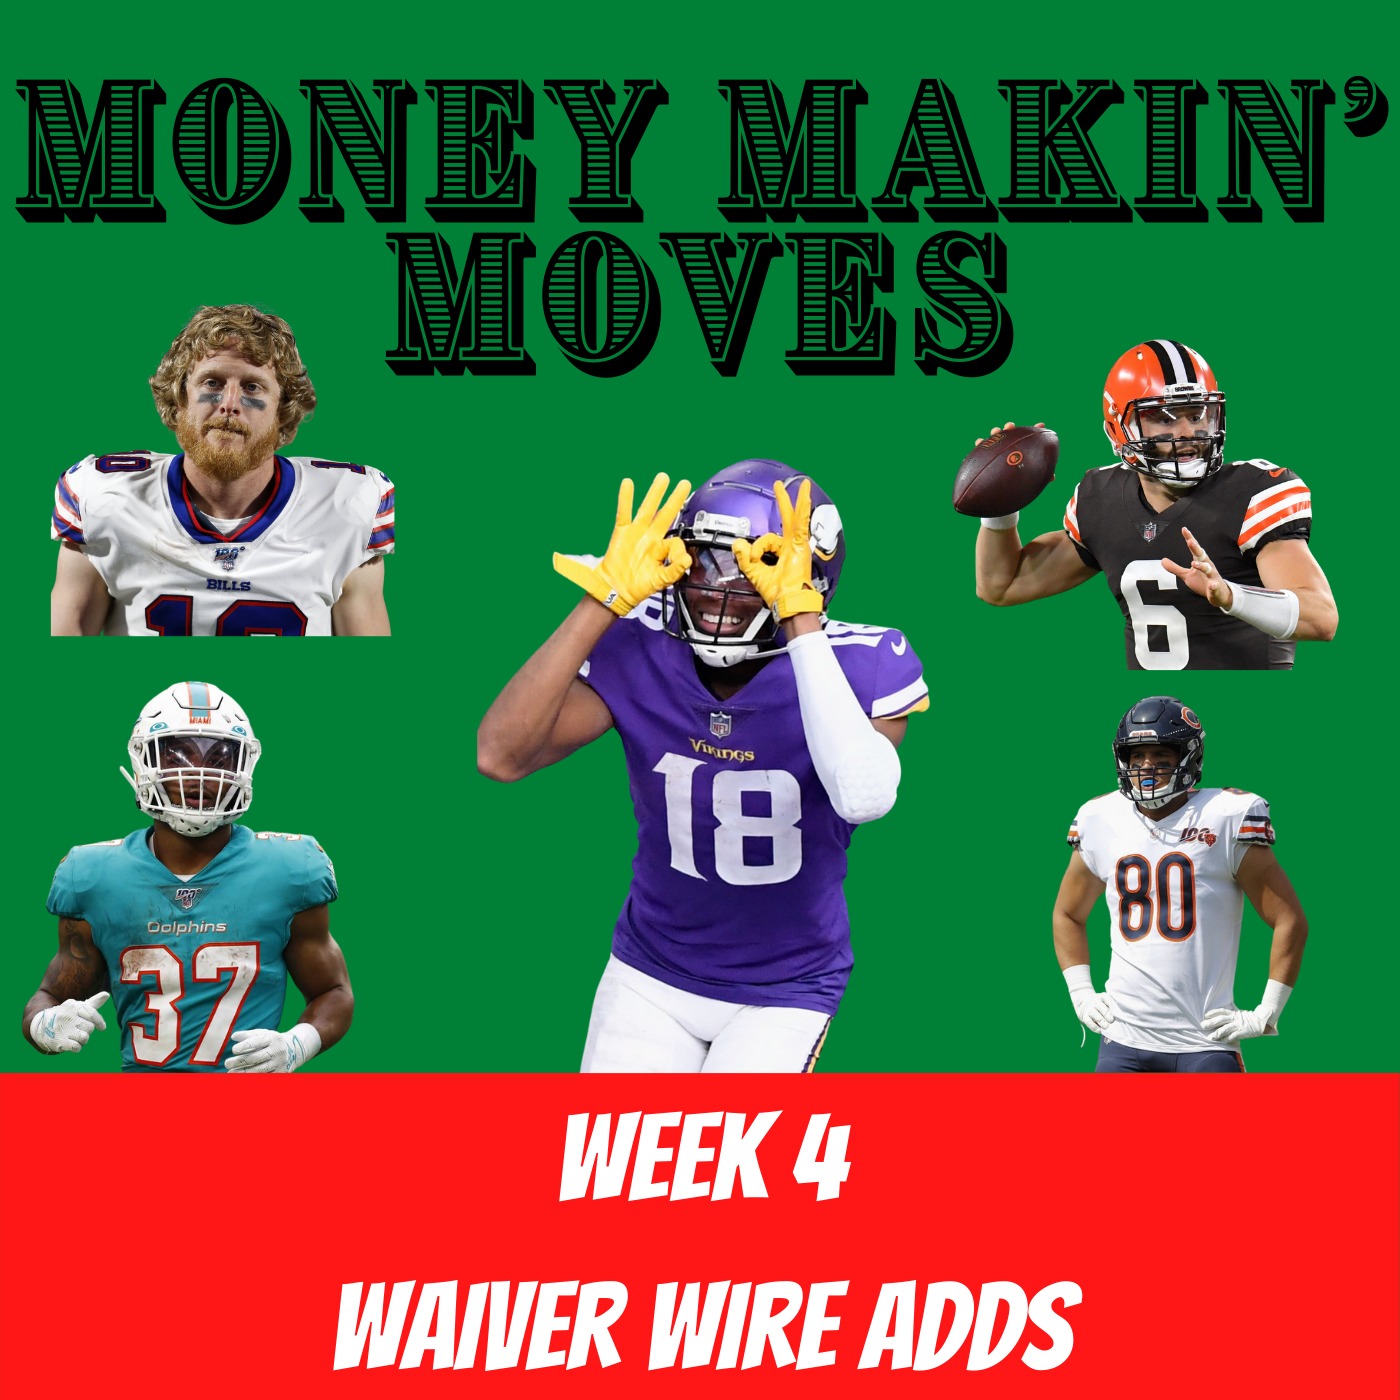 Week 4 Offensive Waiver Wire Adds | Money Makin' Moves